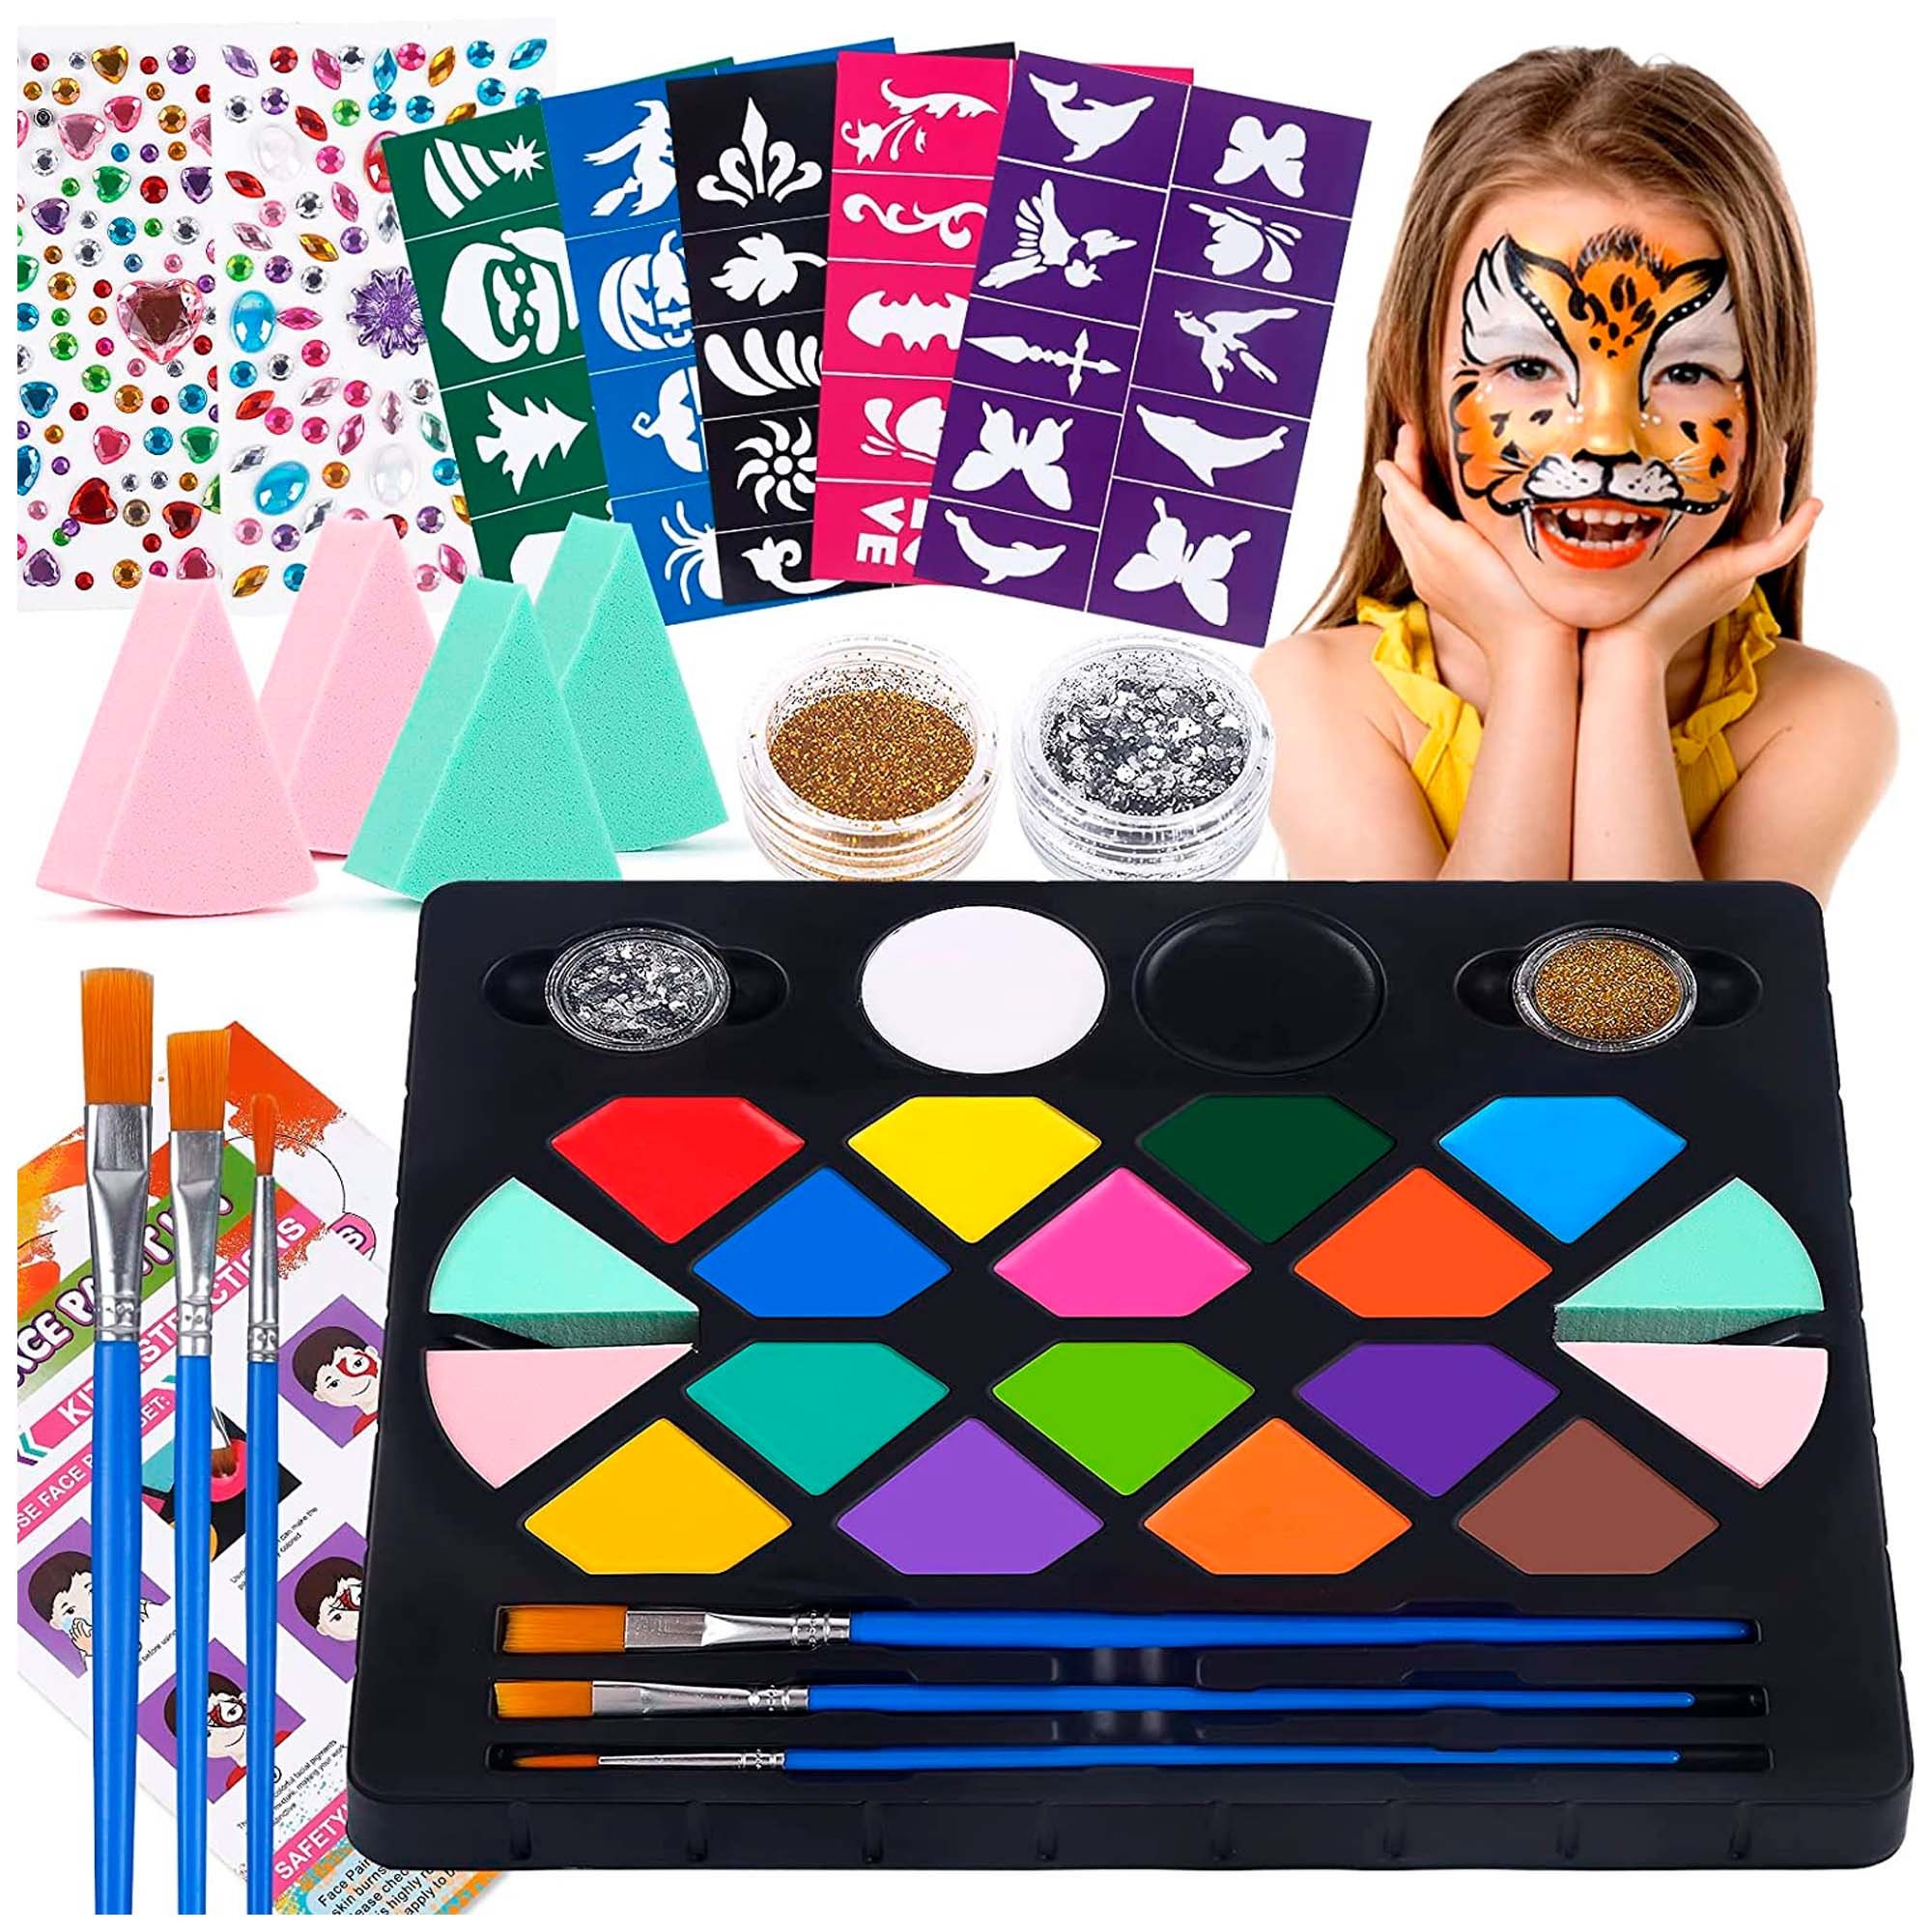 BOBISUKA Face Painting Kit for Kids - 16 Colors Water Based Body Face Paint Includes Brushes,Sponges,Glitters,Gem Sheet,Instructions,Stencils for